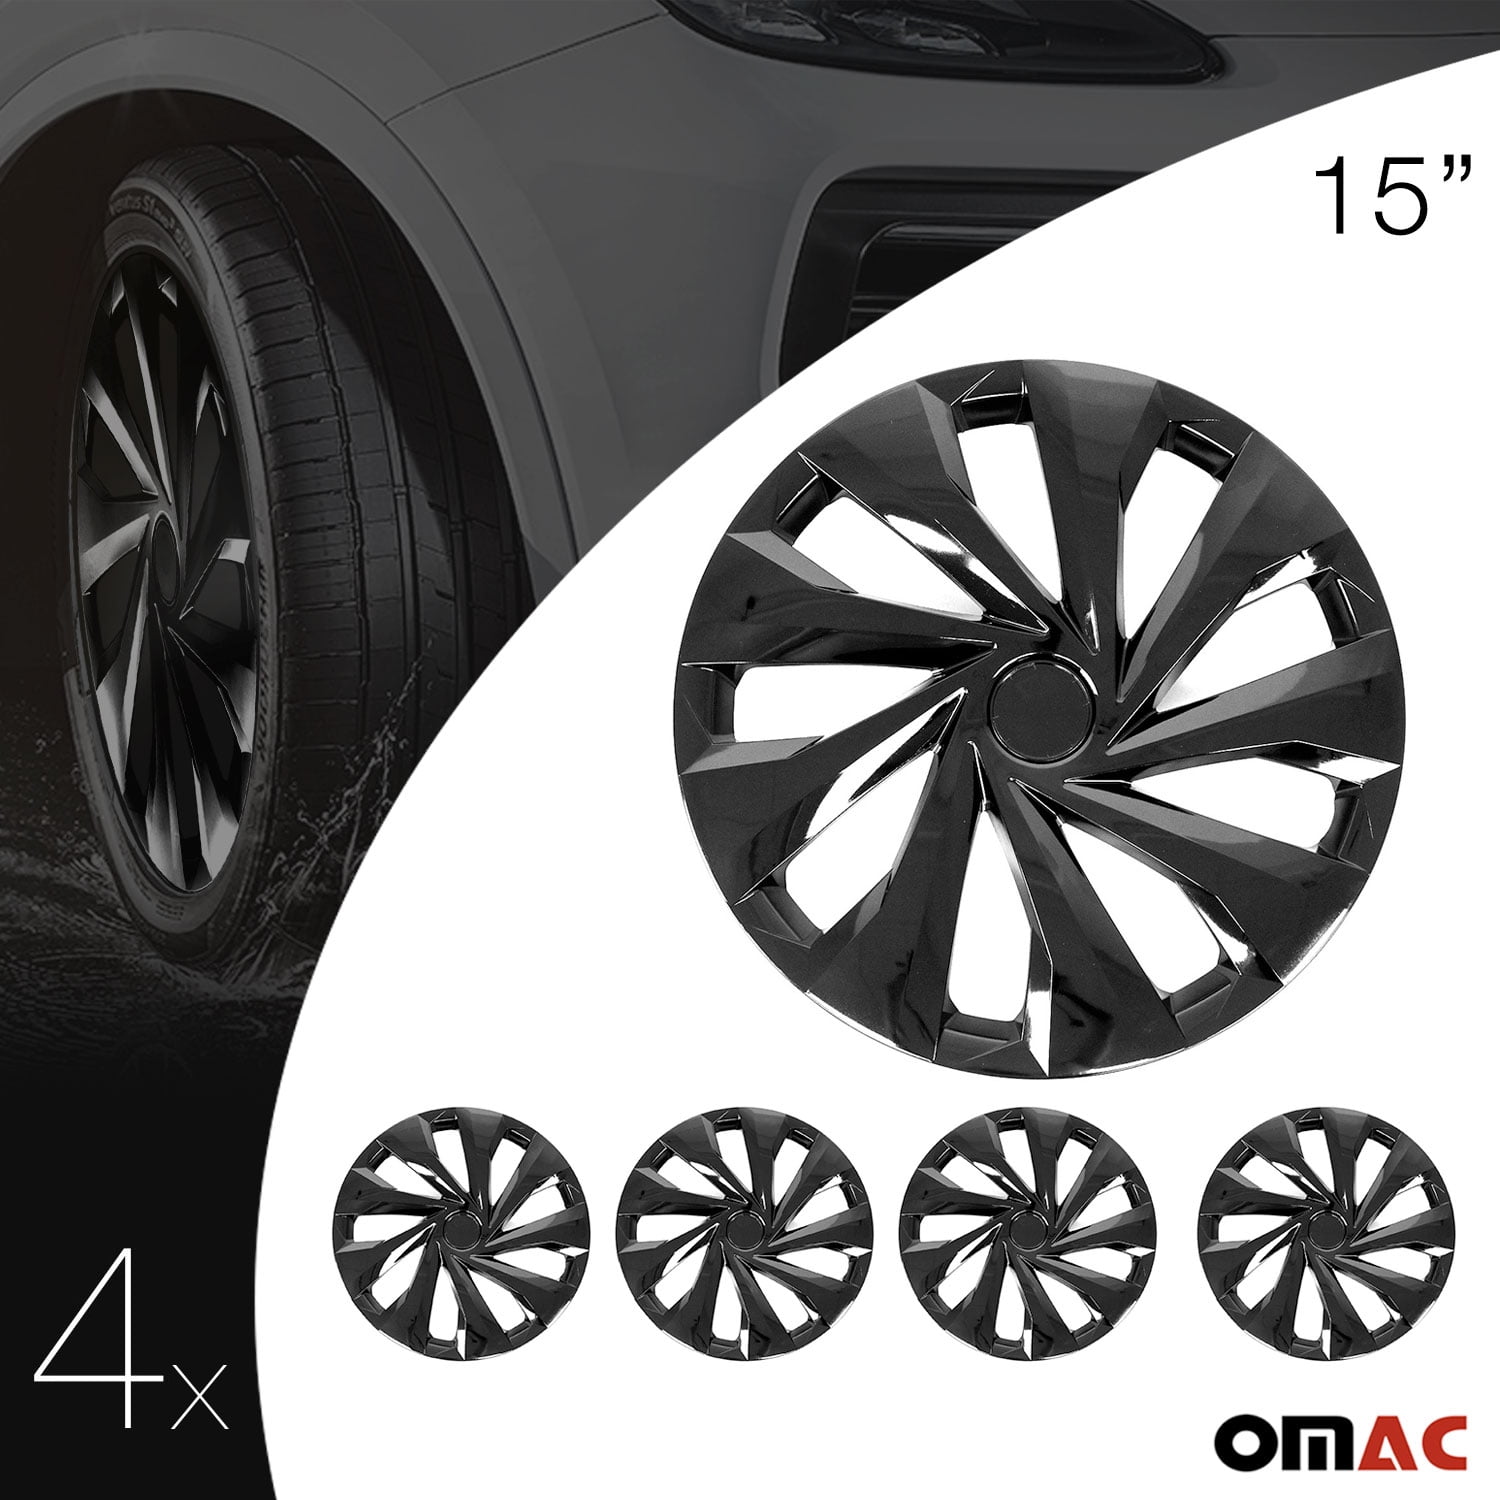 Buy Auto Pearl 4 Pcs 15 inch ABS Black Car Wheel Cover Set for Toyota Yaris,  WCBLK013 Online At Price ₹1325